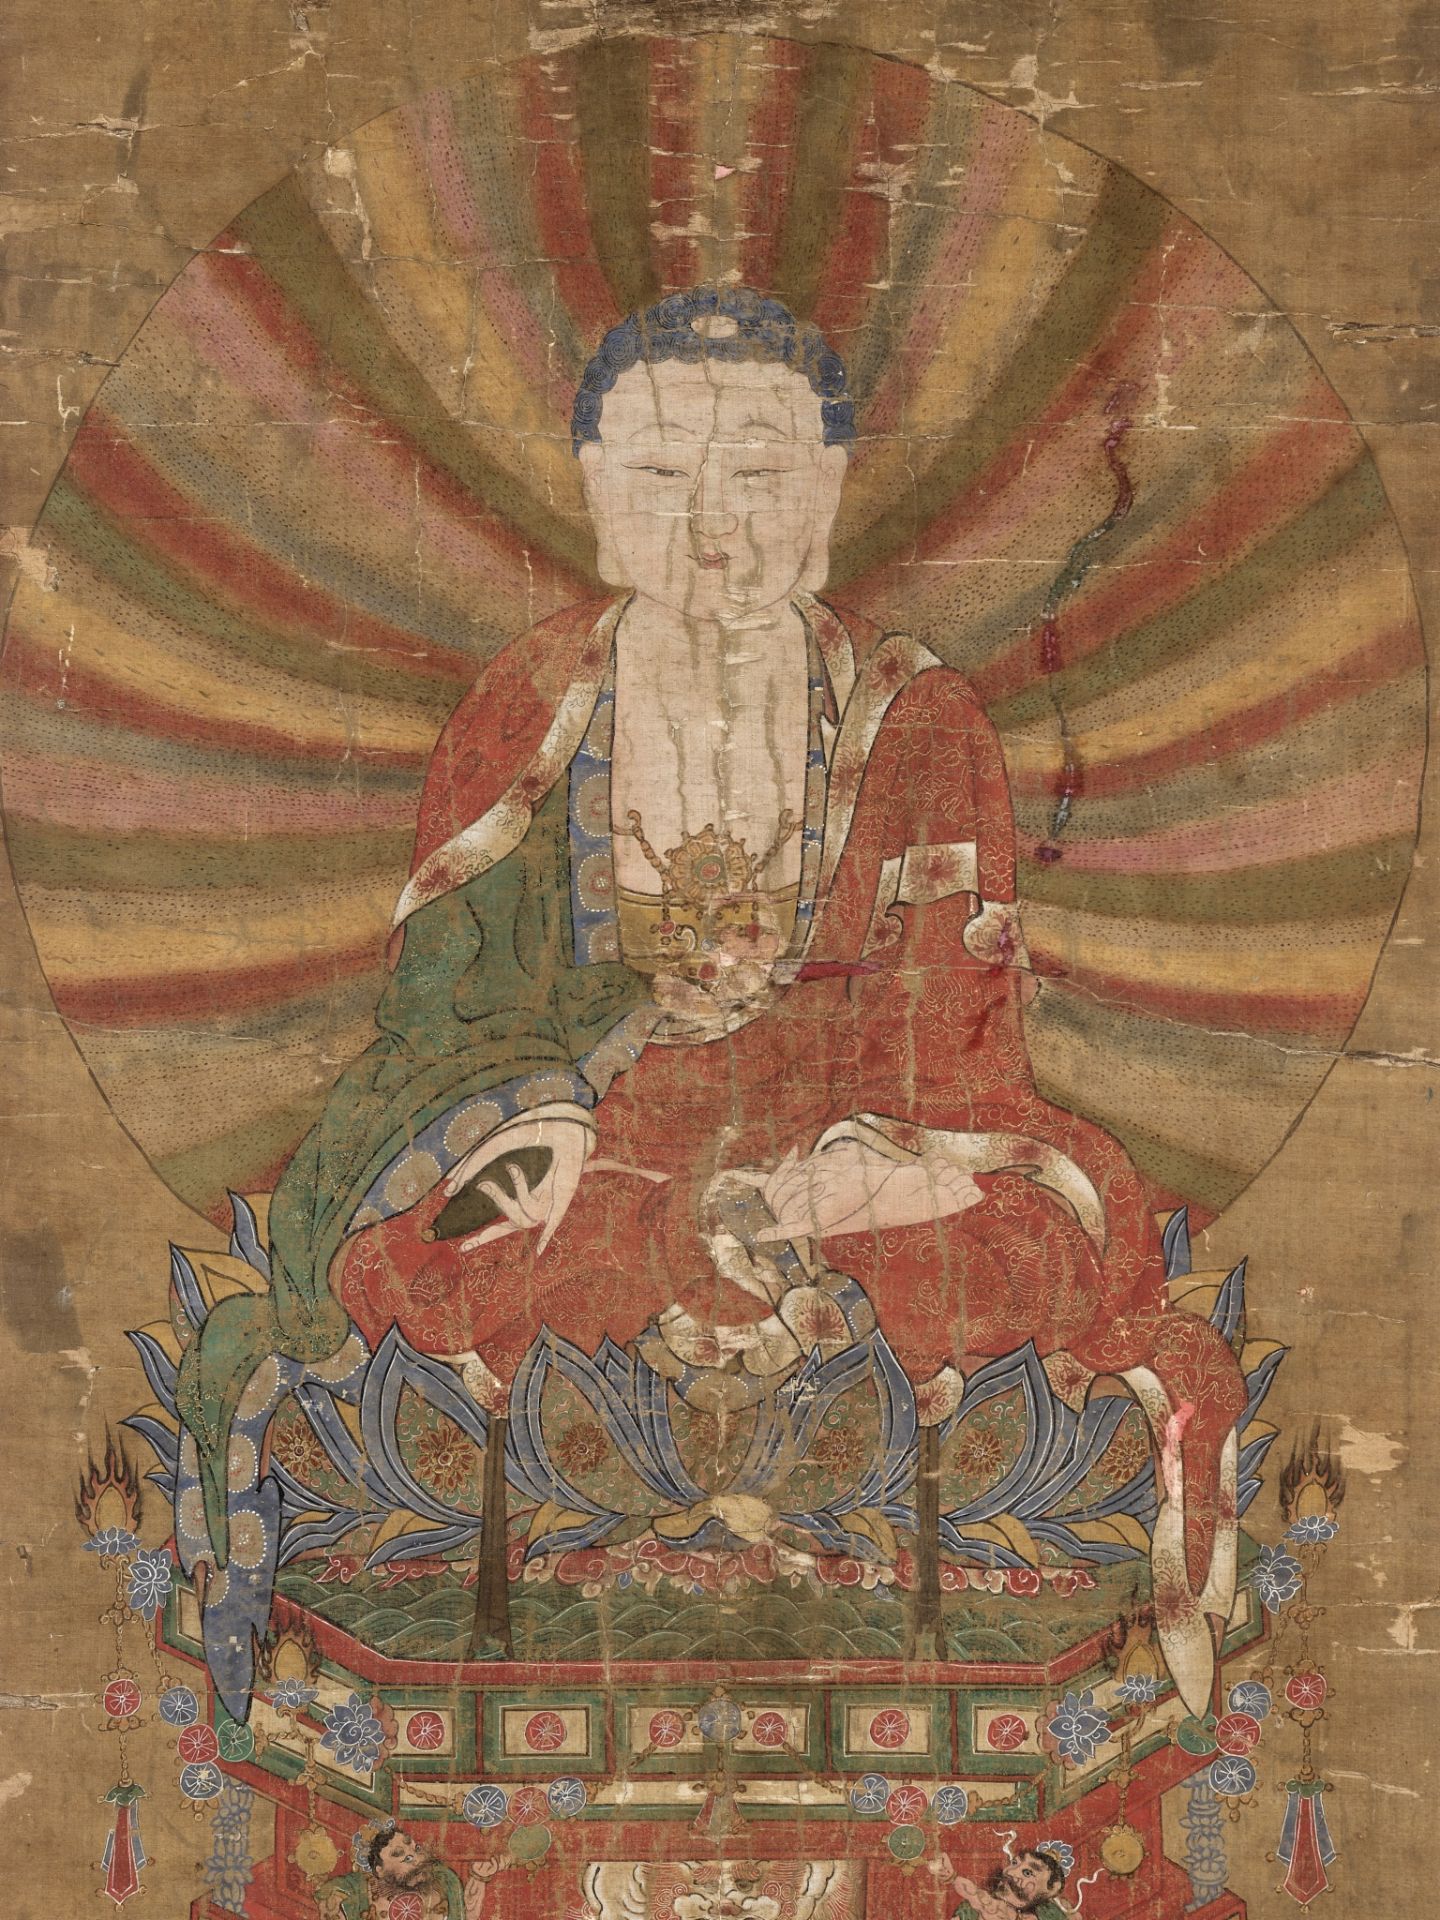 AN IMPORTANT BUDDHIST VOTIVE PAINTING DEPICTING BUDDHA, EARLY MING DYNASTY, 1400-1450